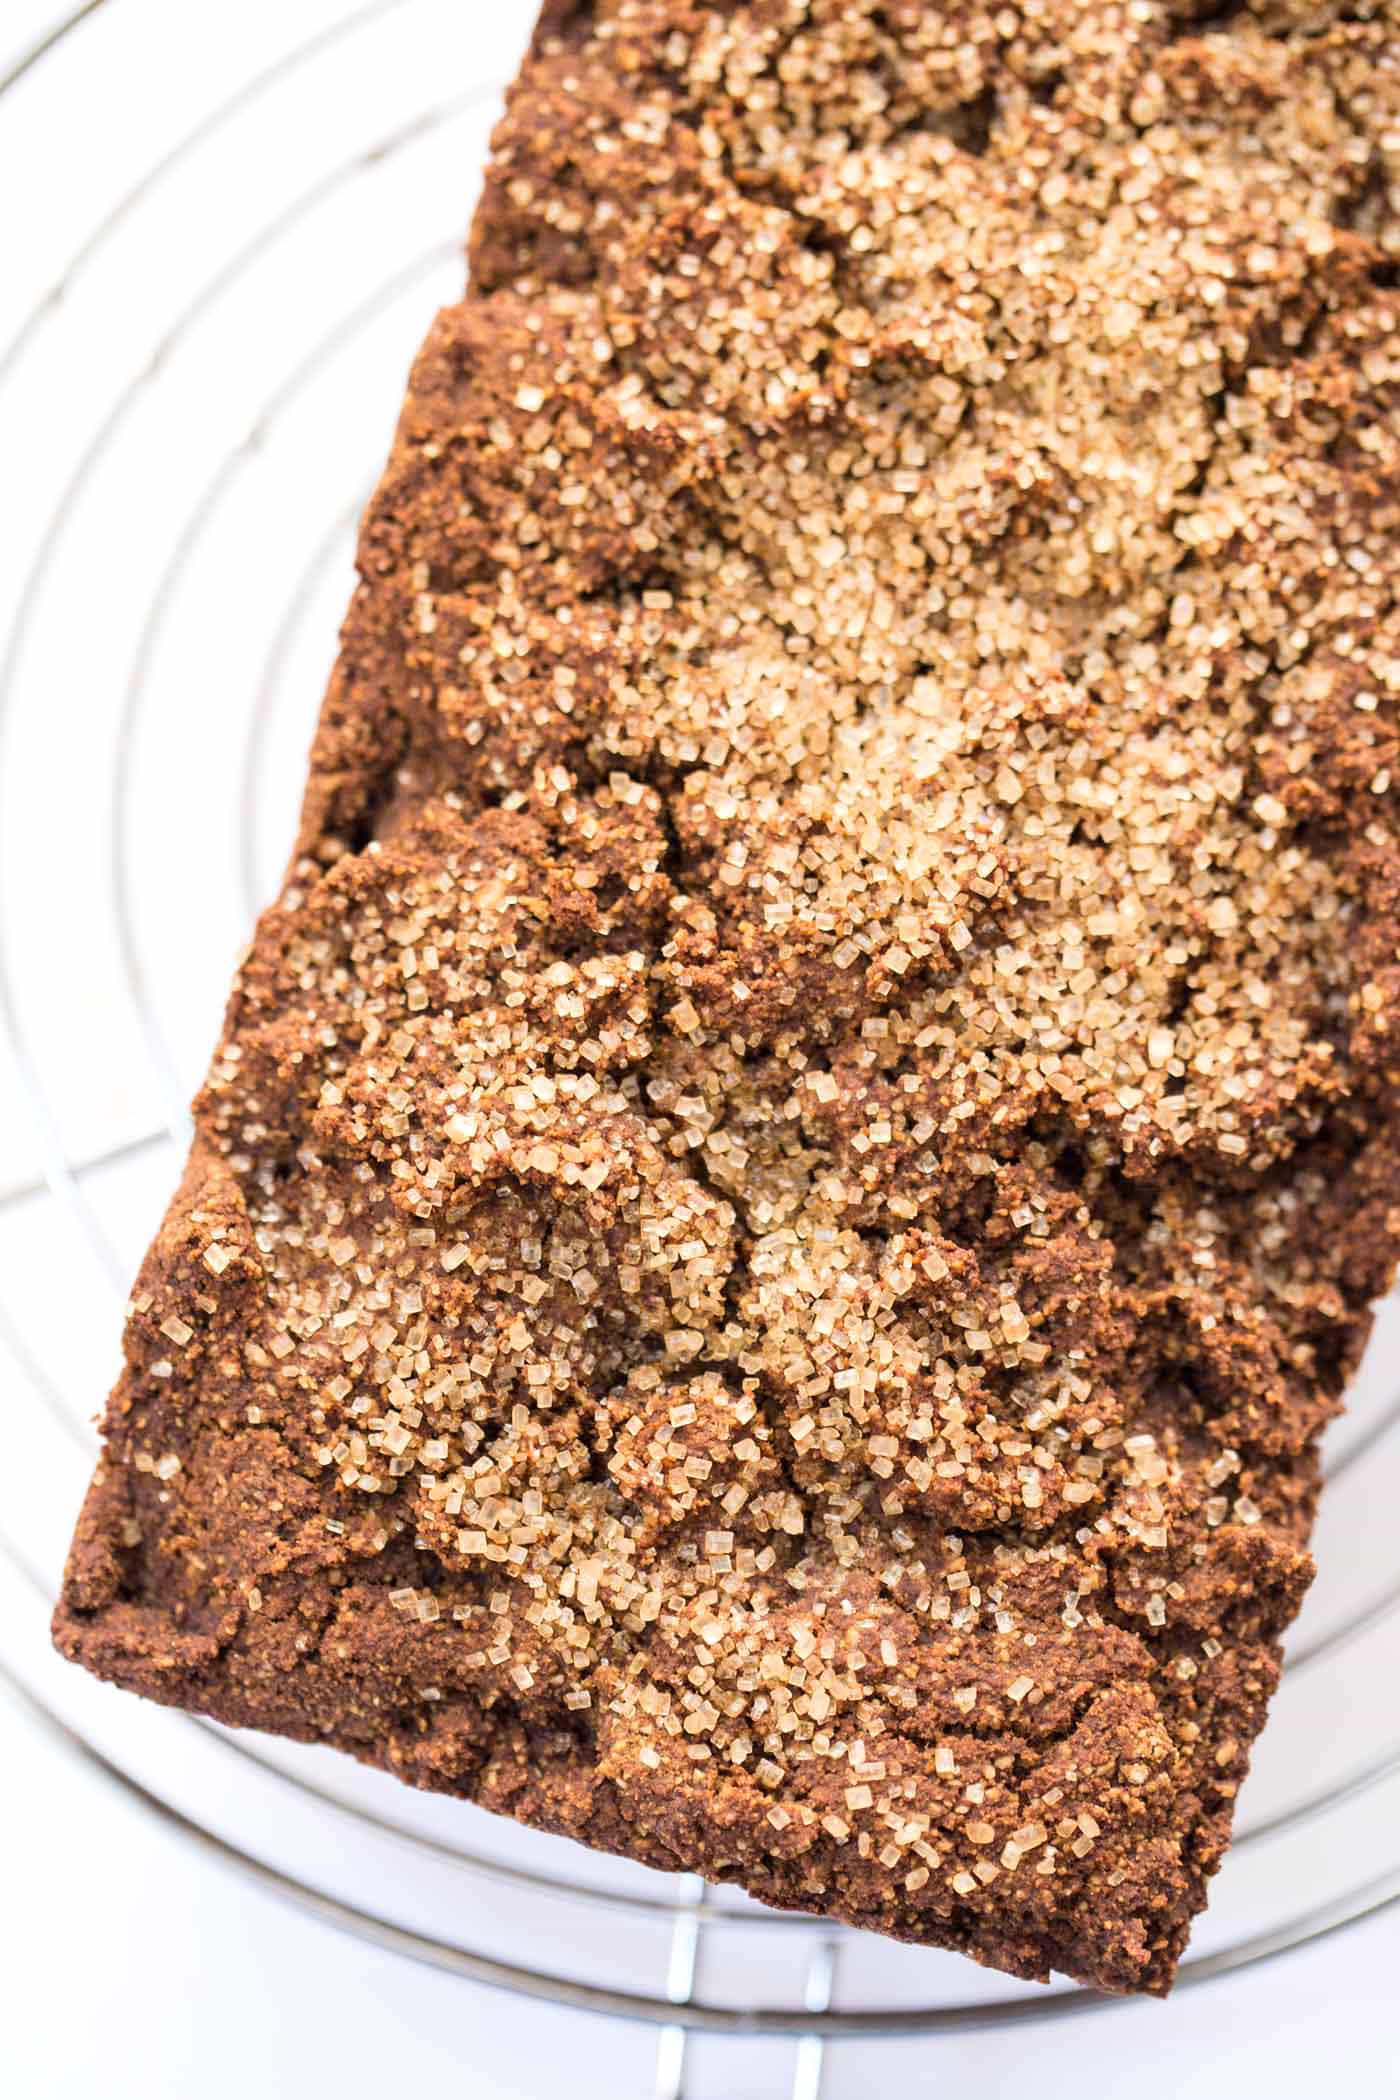 This HEALTHY vegan gingerbread loaf is perfect for the holidays! Made with almond and quinoa flours, it's high in protein, packed with healthy fats and tastes amazing! [vegan]